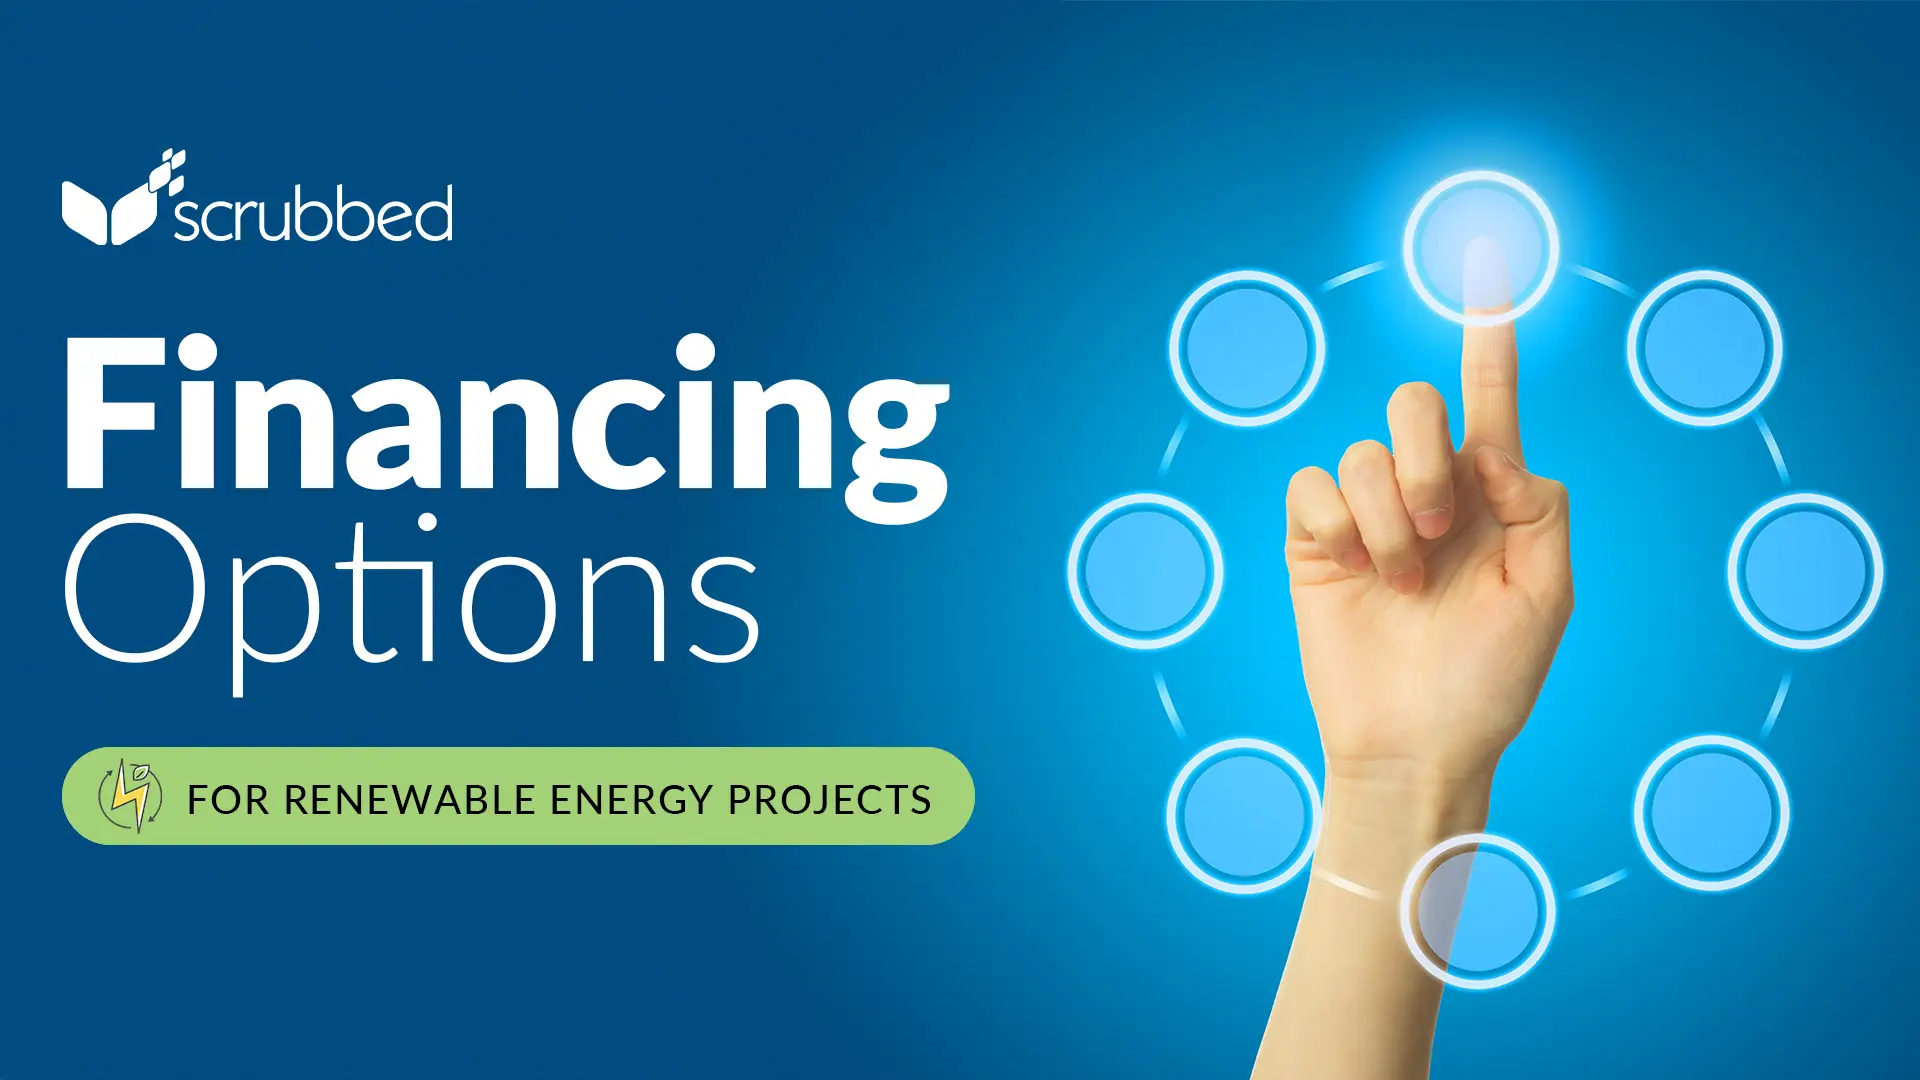 What types of financing options are available to support renewable energy projects, and what are the associated costs and benefits?